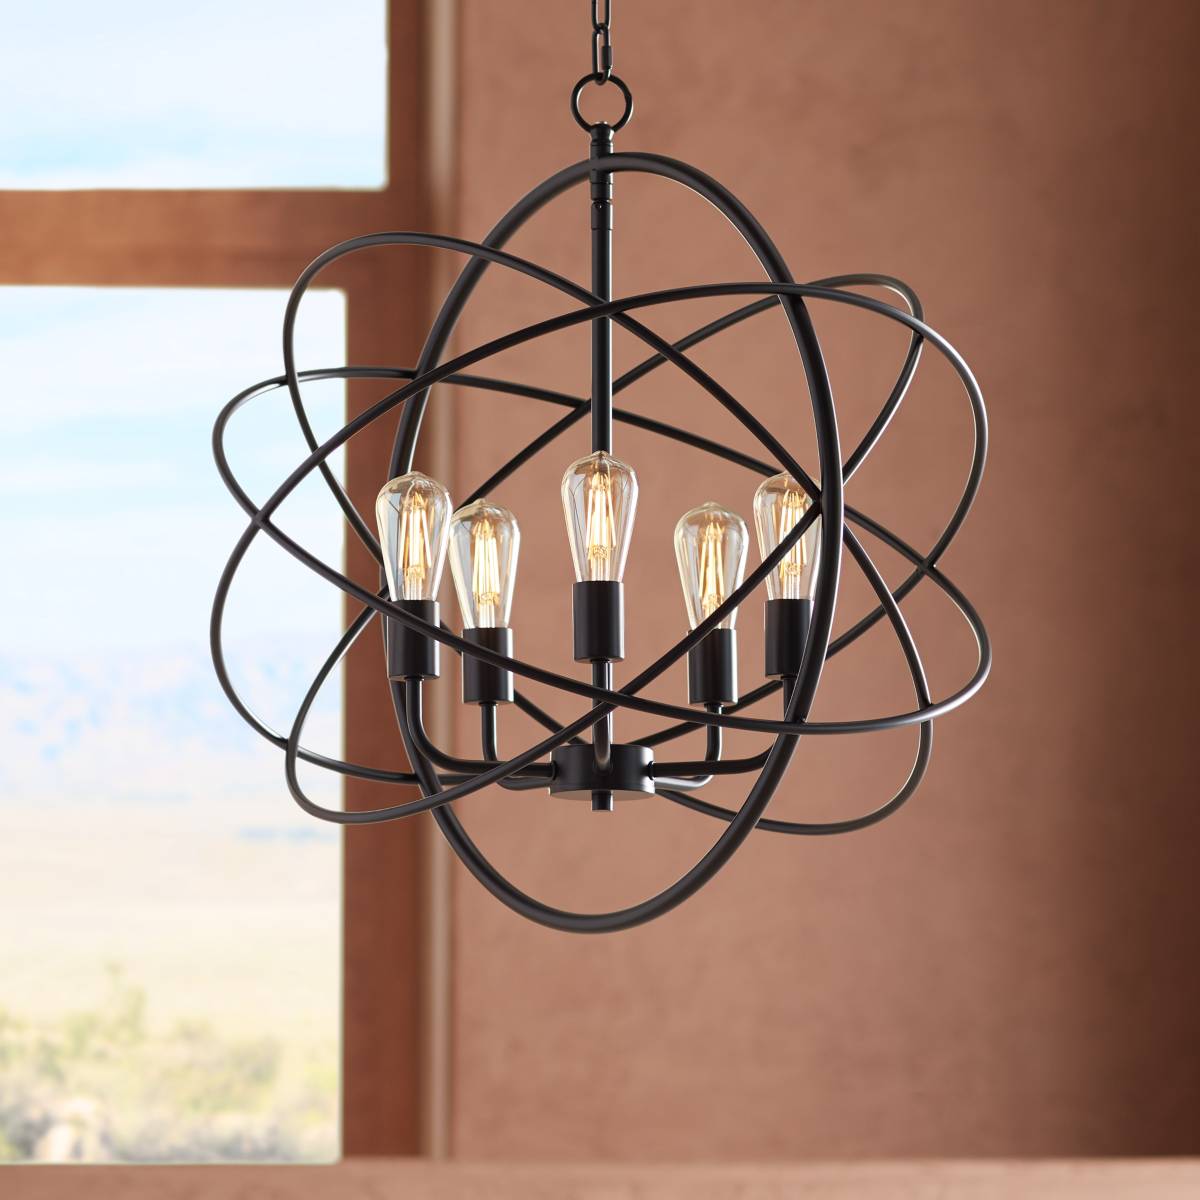 Entry Chandeliers - Upscale Entryway Chandelier Designs | Lamps Plus